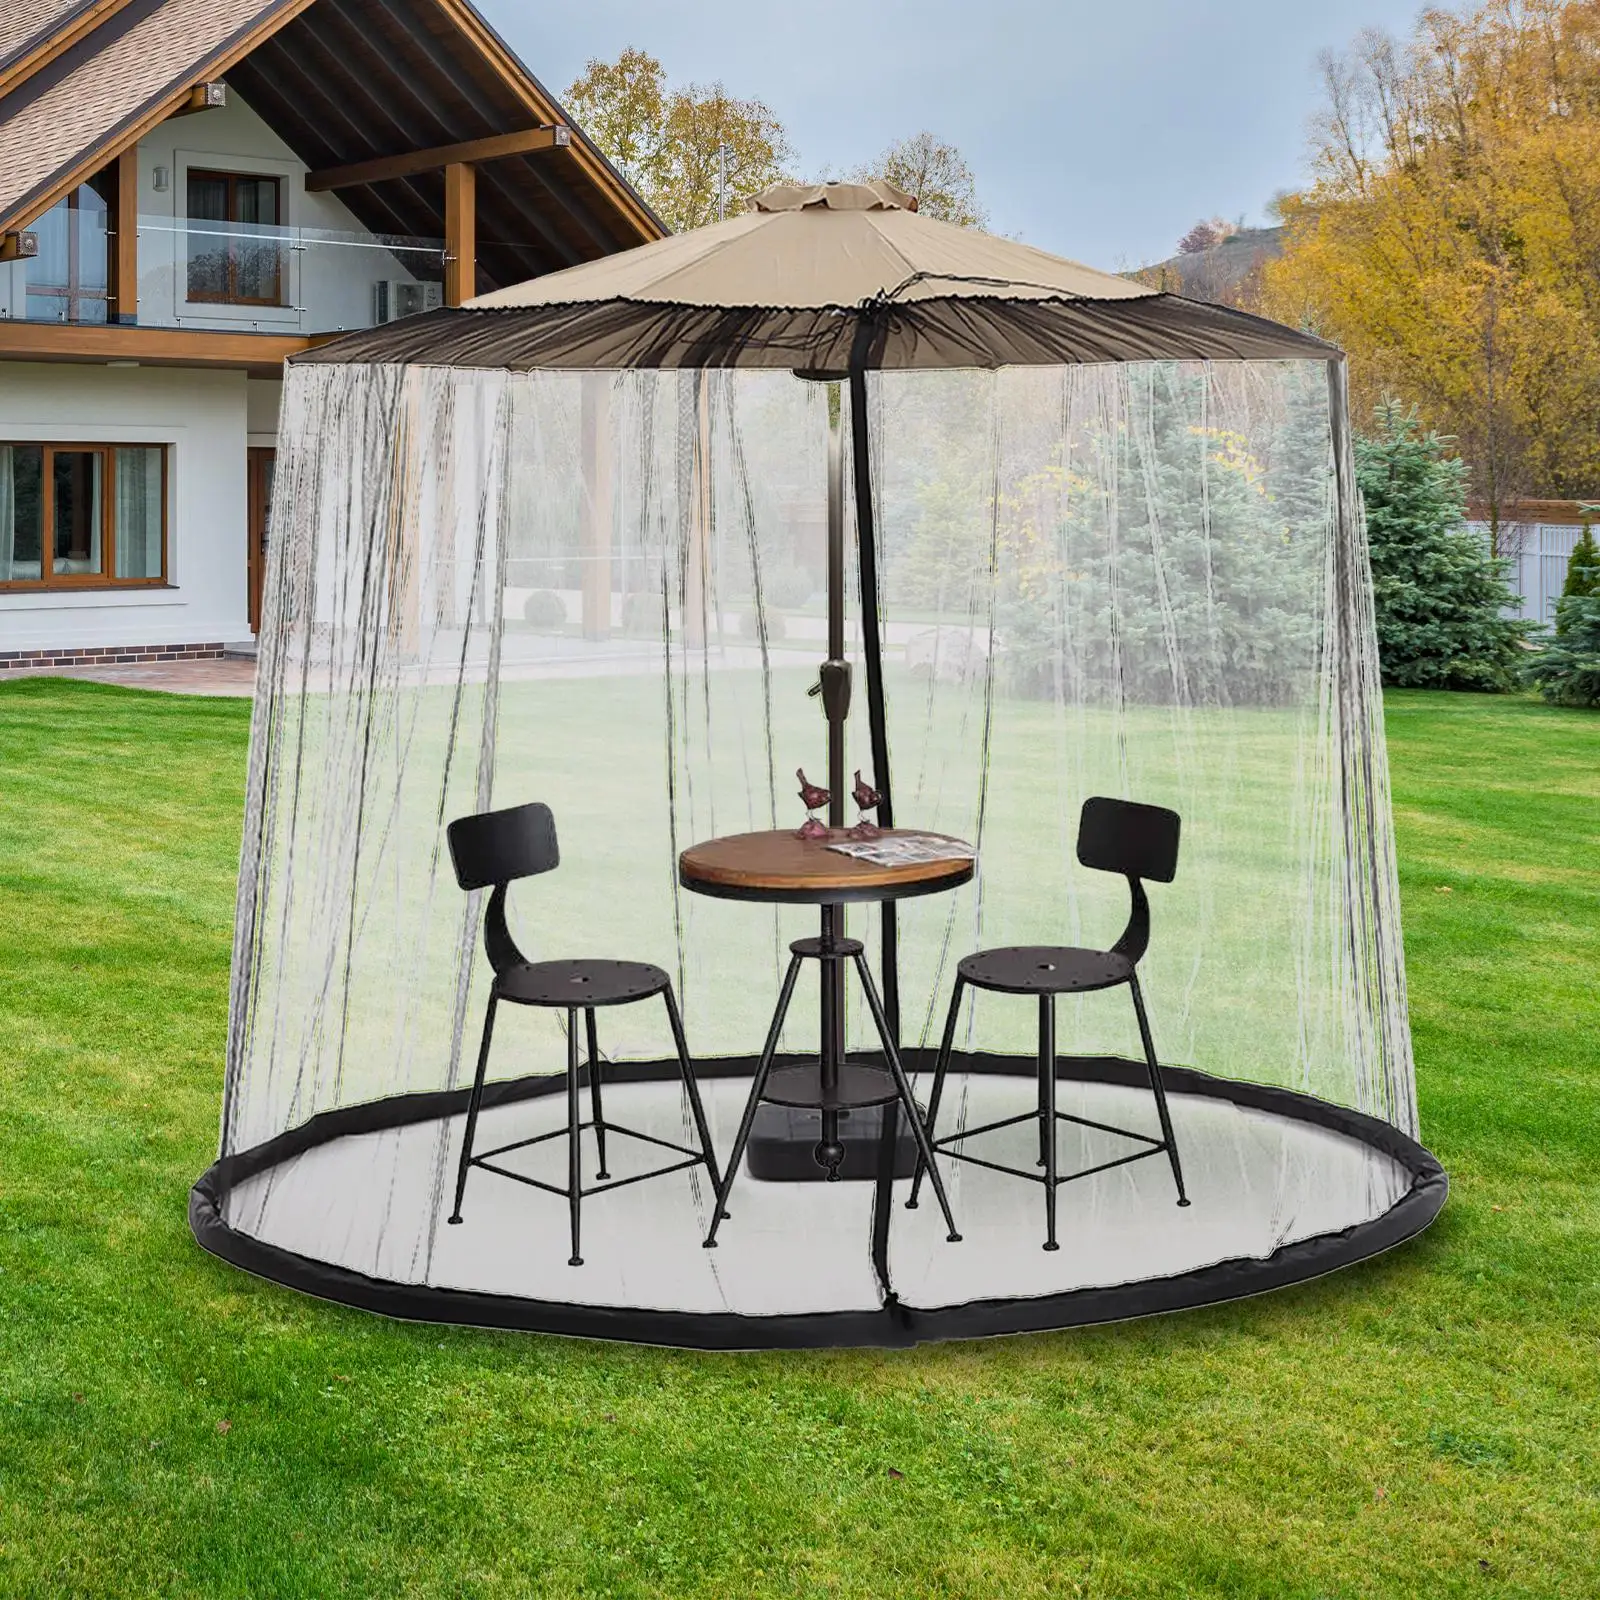 Umbrella Netting Easy to Intall Garden Covers Hanging Tent Mesh for Journey